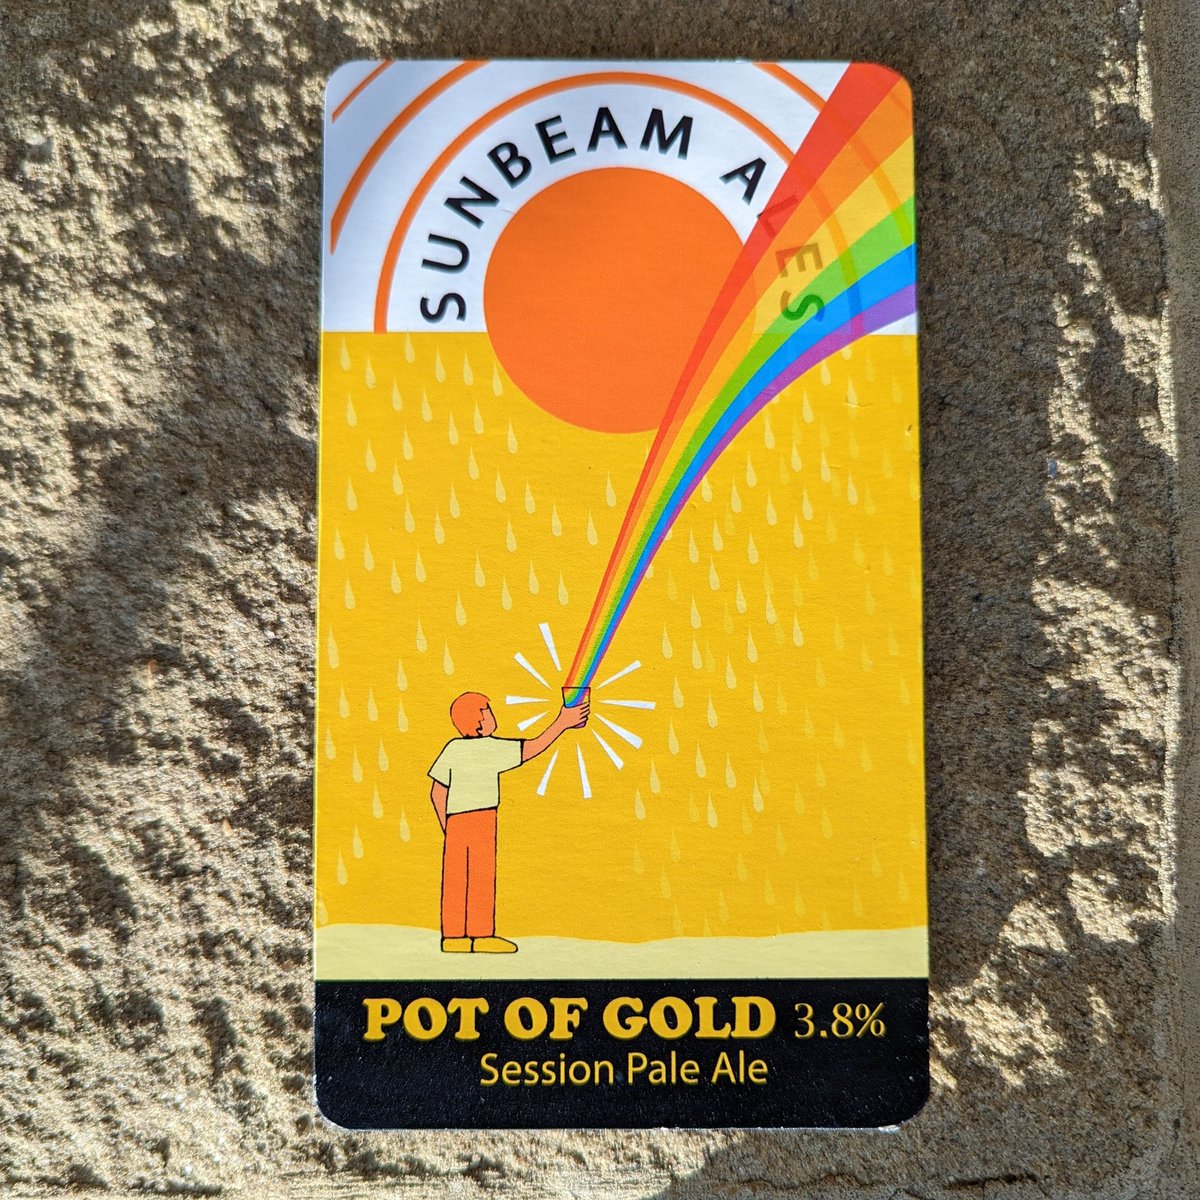 Refreshing pints of cask @SunbeamAles Pot of Gold pouring all weekend at the Biere Cafe.
#Pub #FamousPubTown #Otley